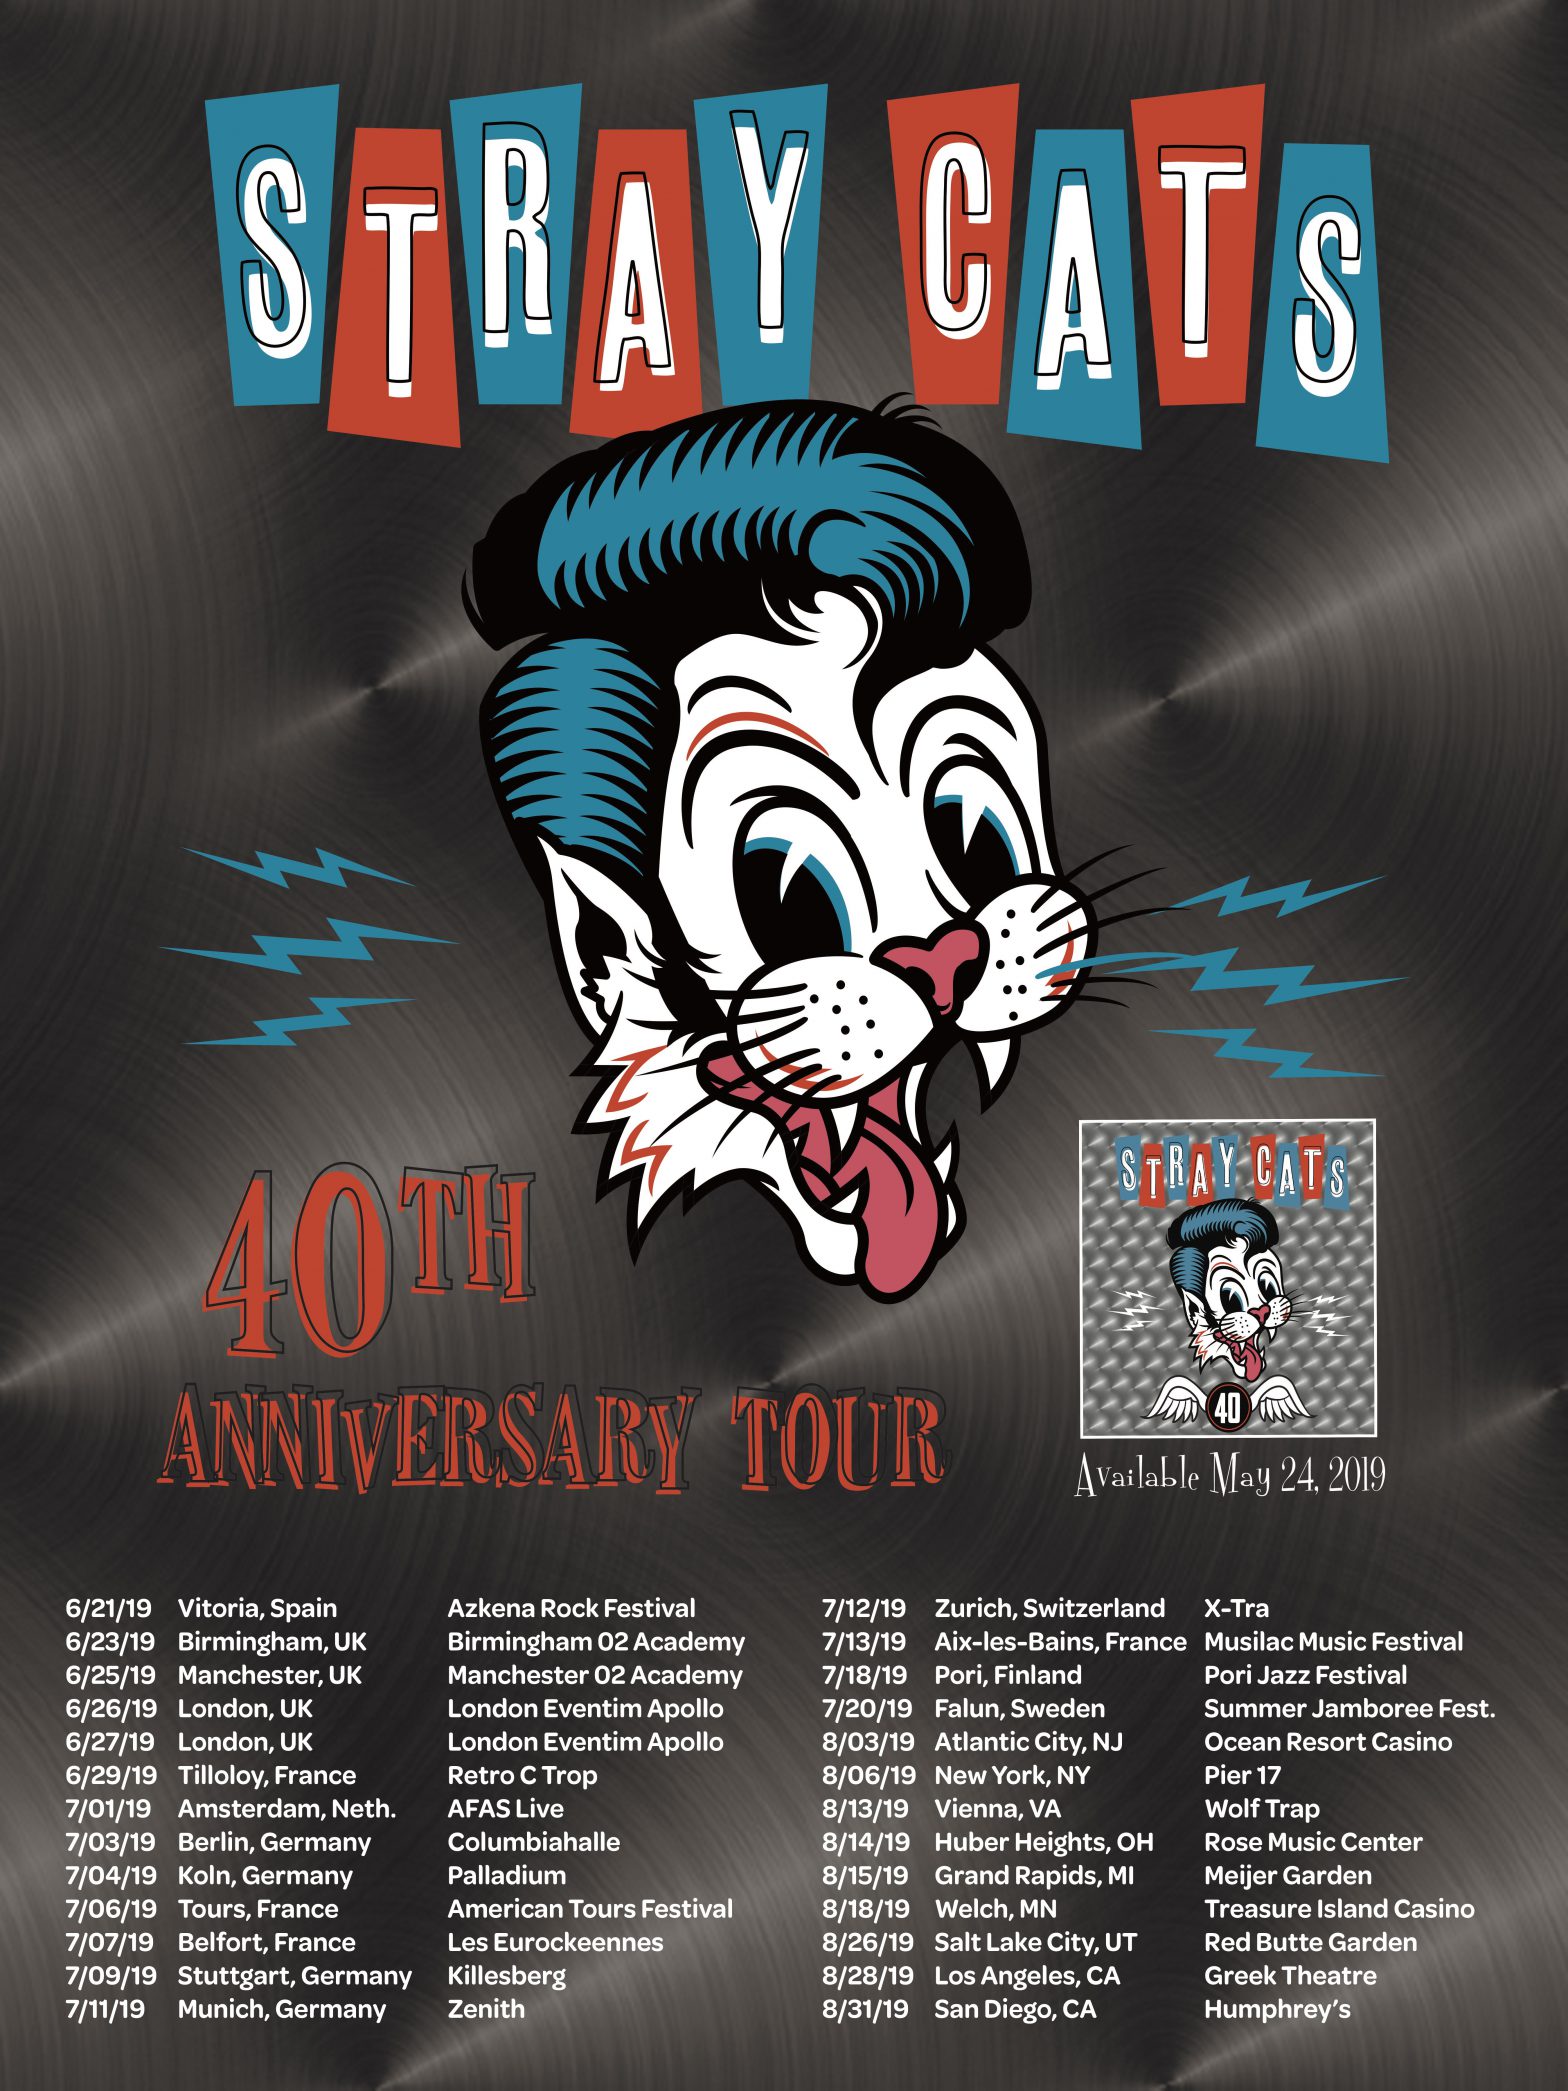 Stray Cats Are Playing Select Dates In The US! Brian Setzer